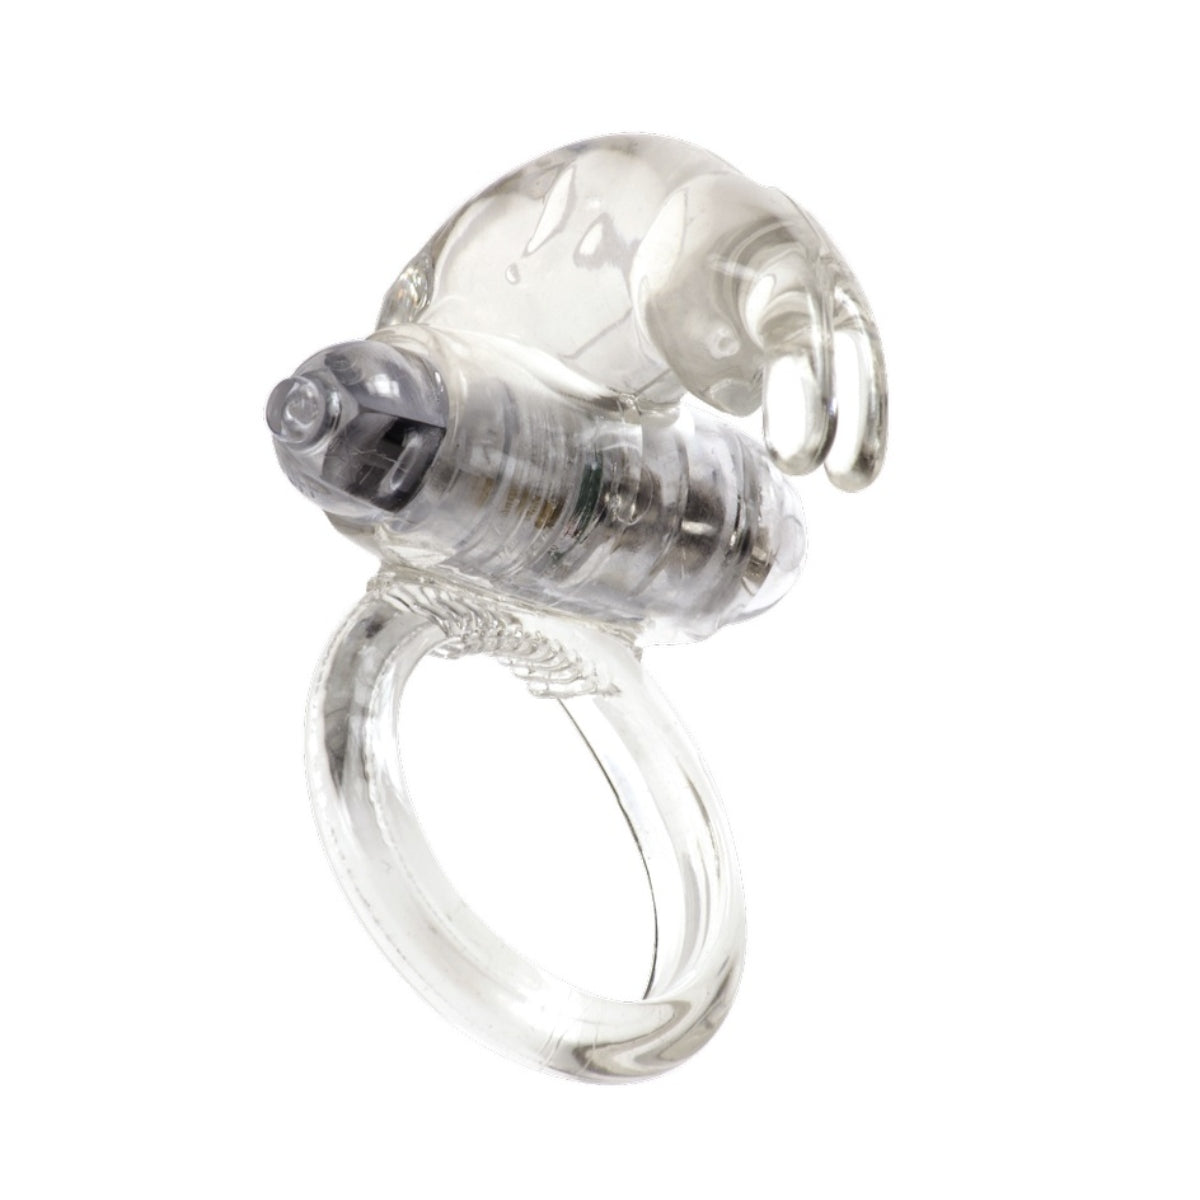 Me You Us Classic Rabbit Vibrating Cock Ring Clear - Simply Pleasure